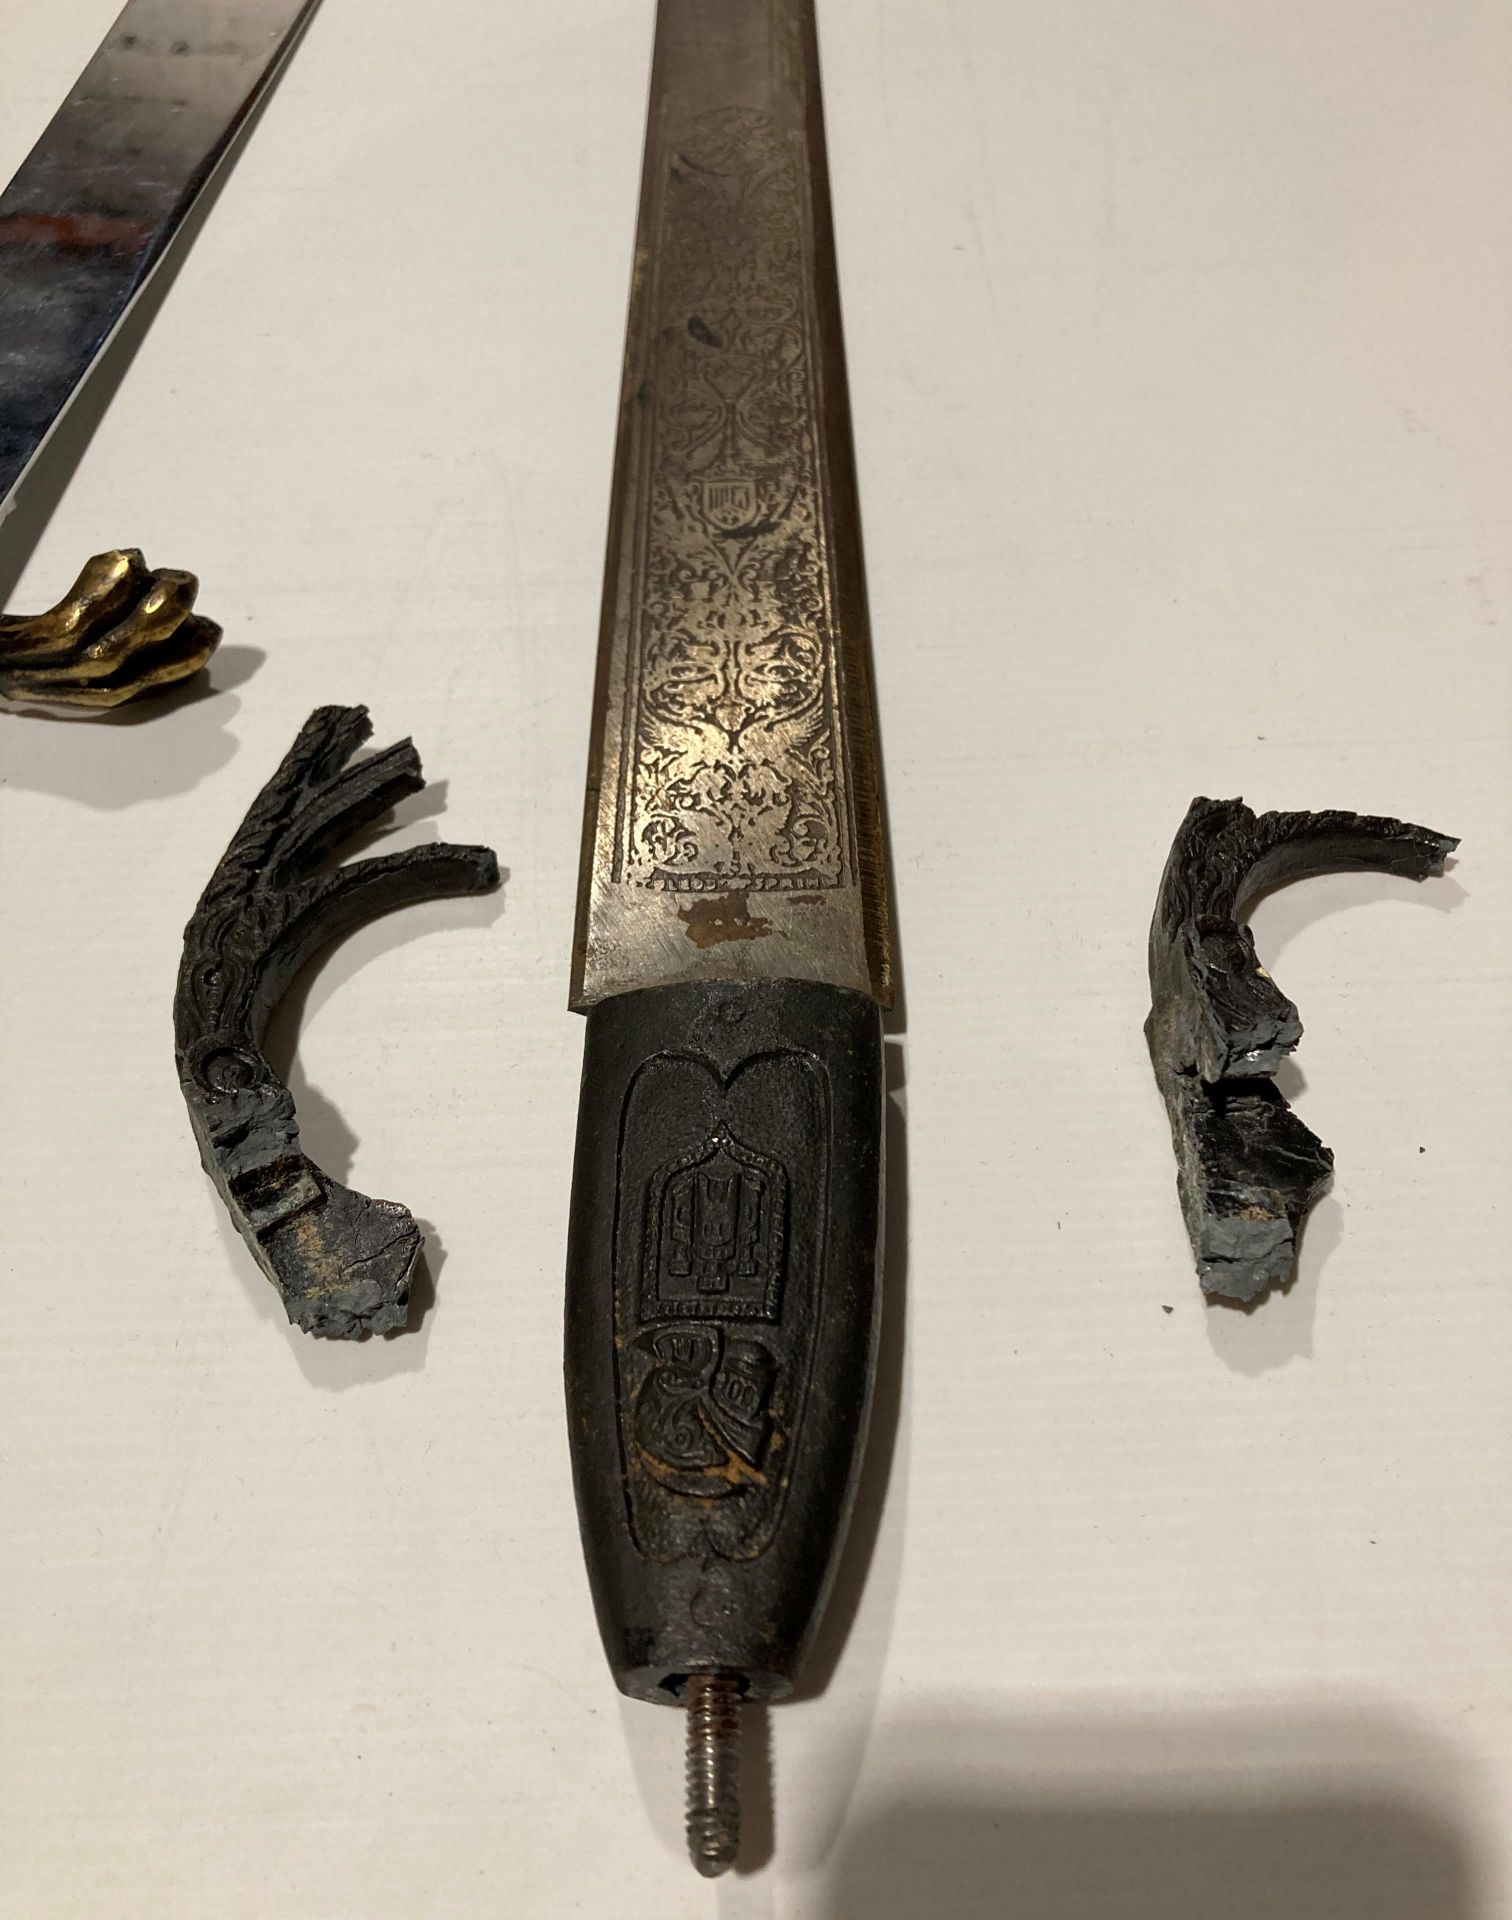 A reproduction steel sword with eagle/dragon head handle (61cm blade) and decorative sword with - Image 3 of 4